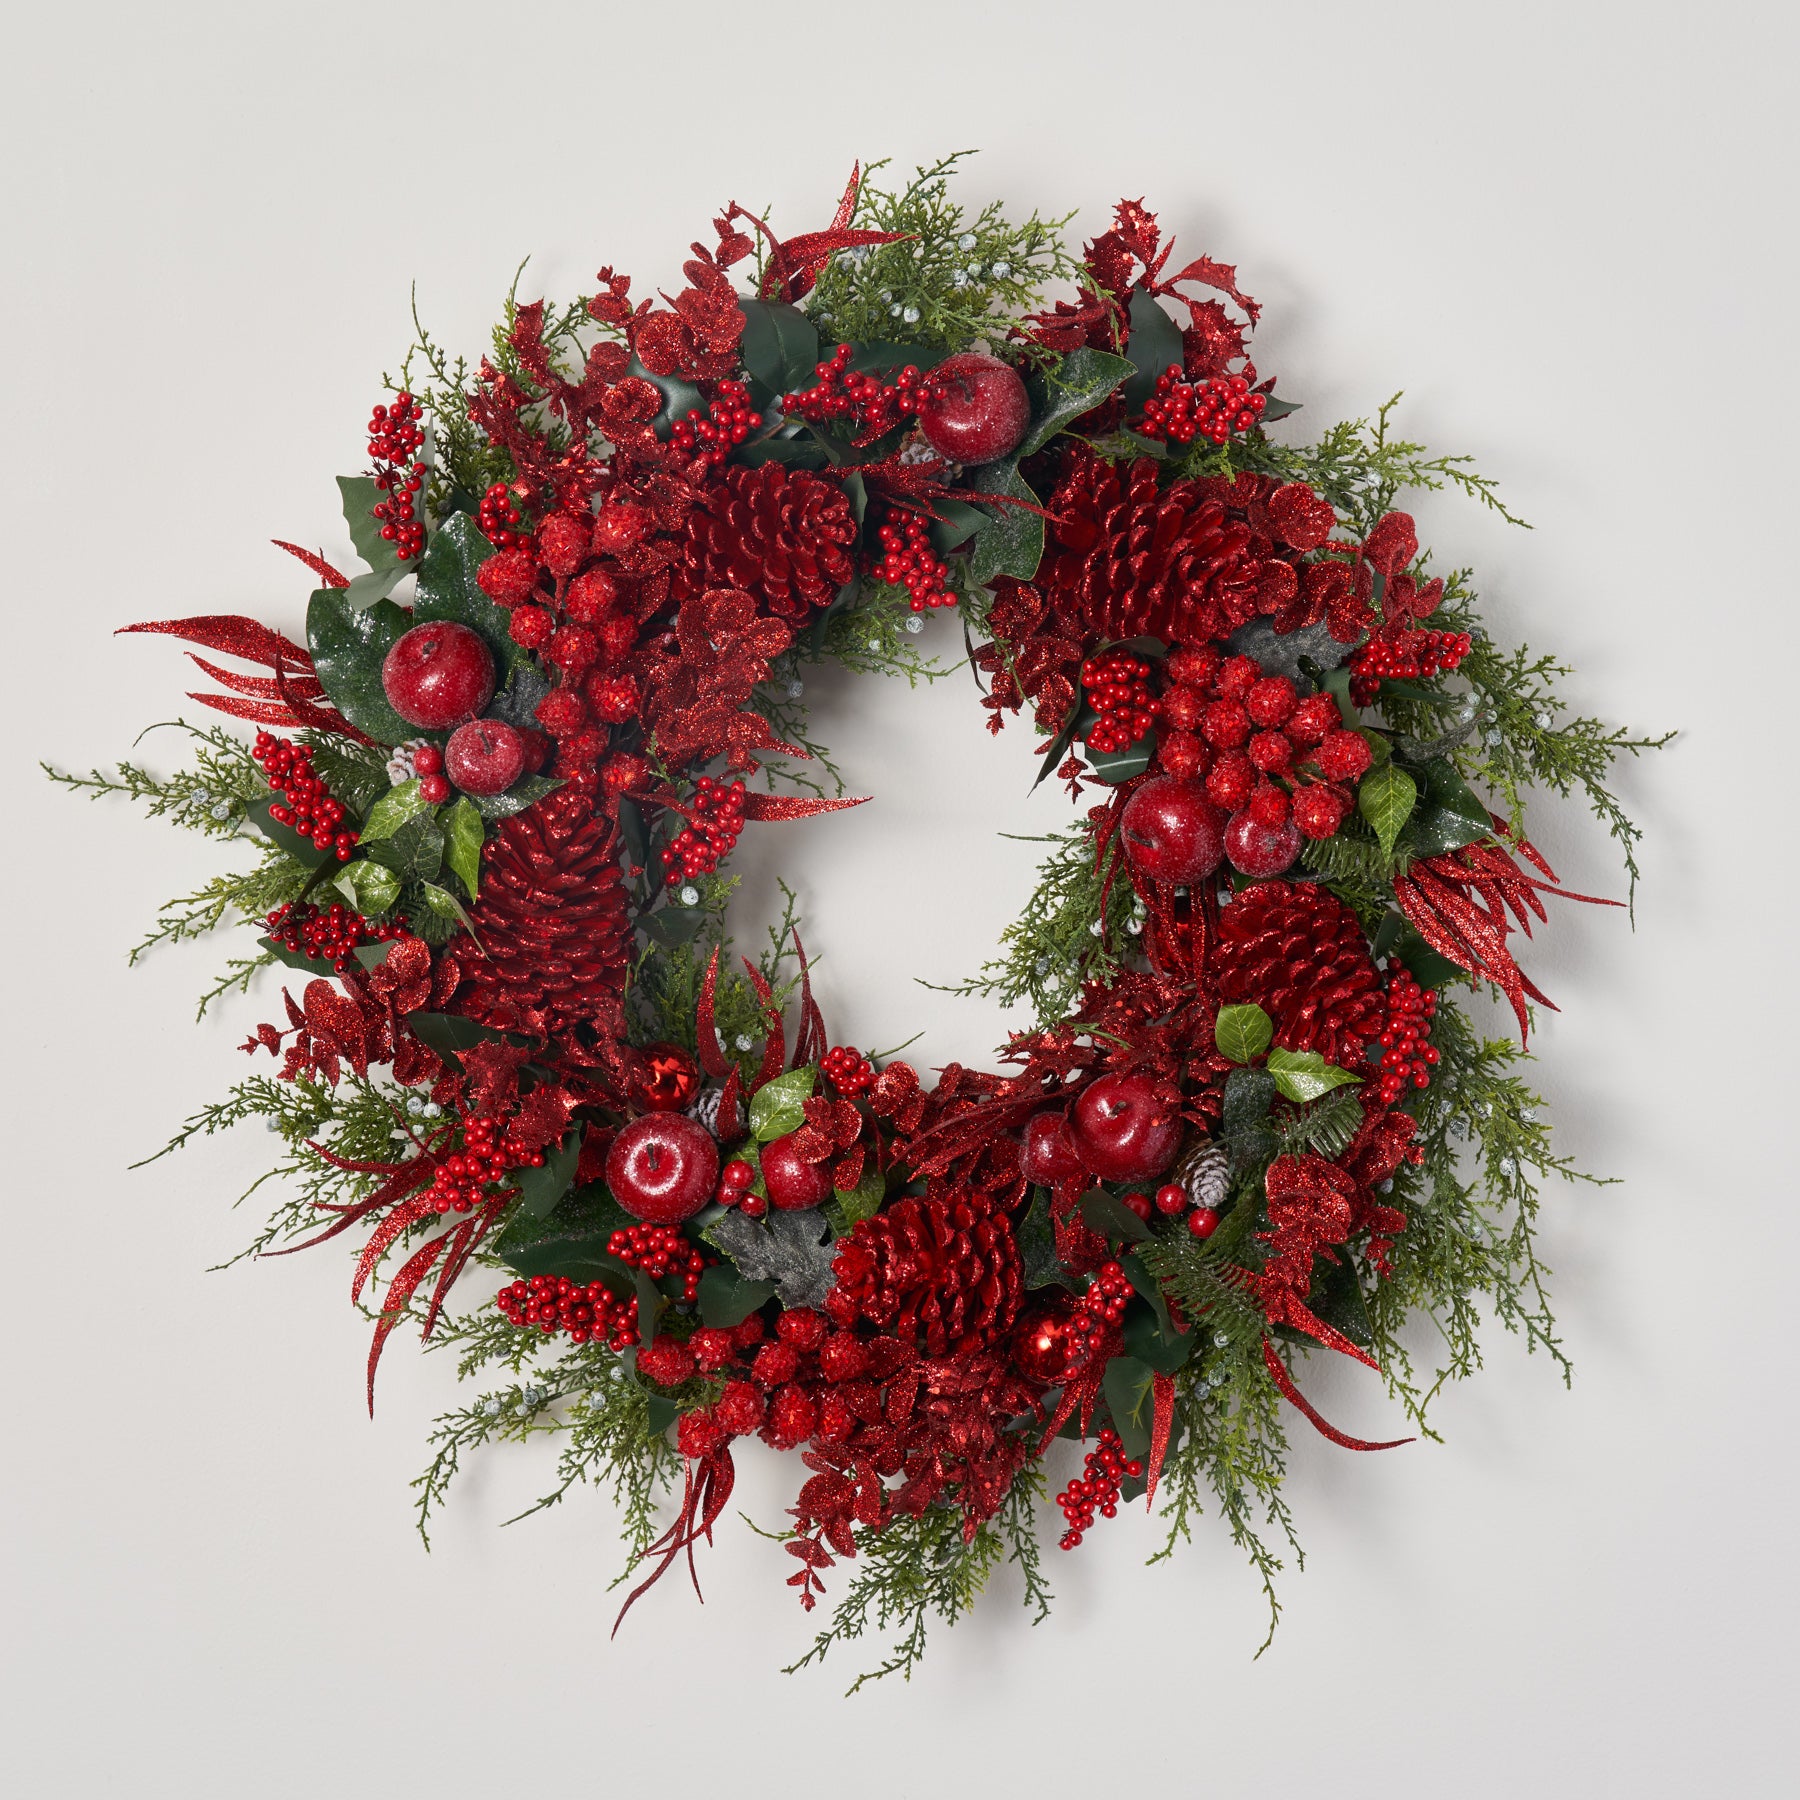 New Wreath Arrivals – Darby Creek Trading